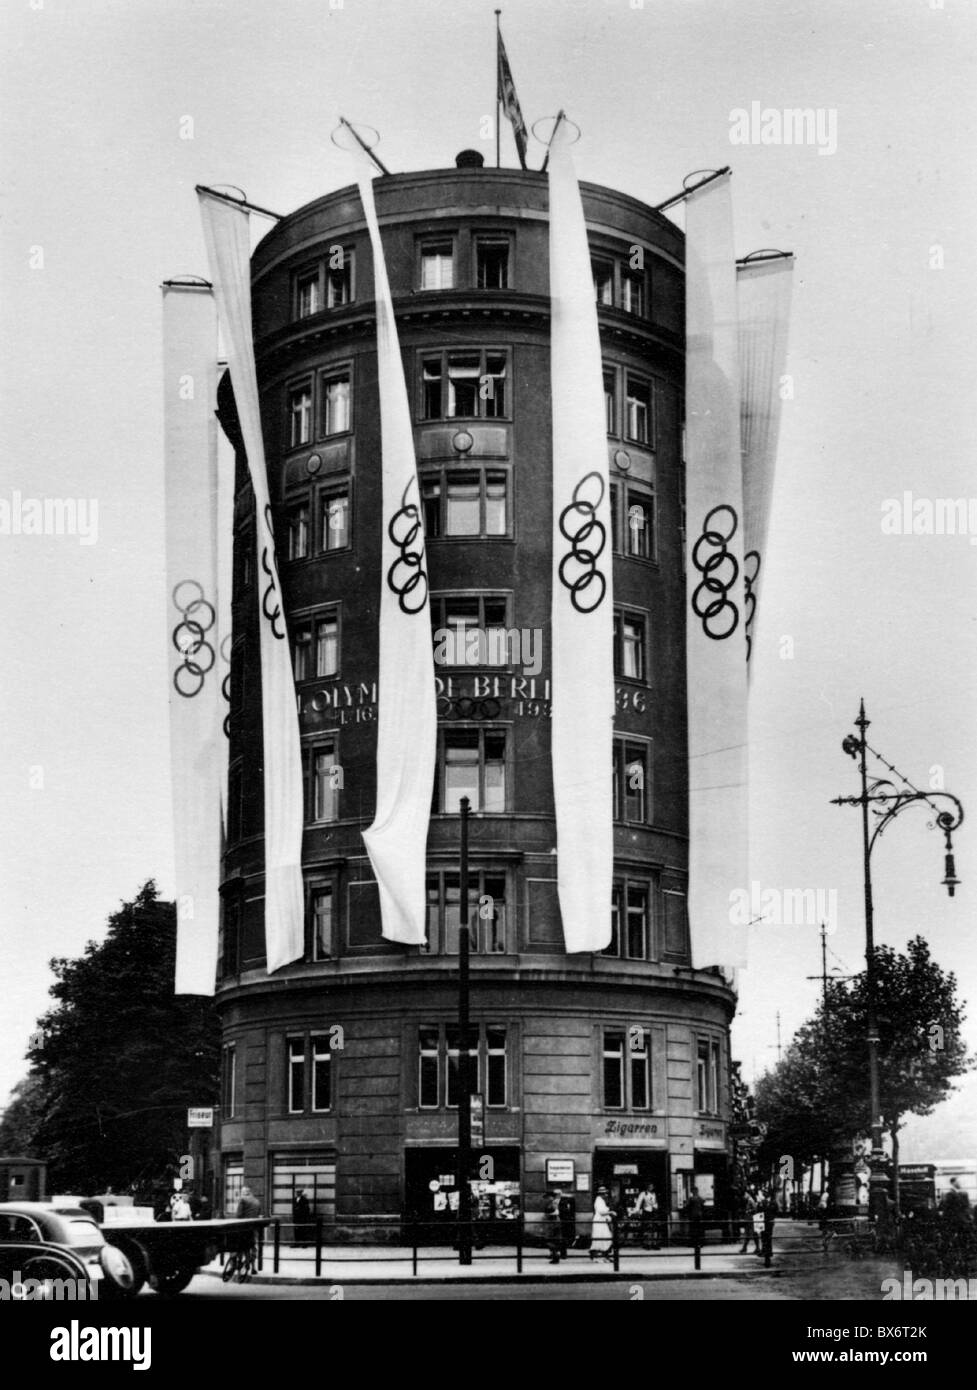 sports, Olympic Games, Berlin 1.- 16.8.1936, Additional-Rights-Clearences-Not Available Stock Photo